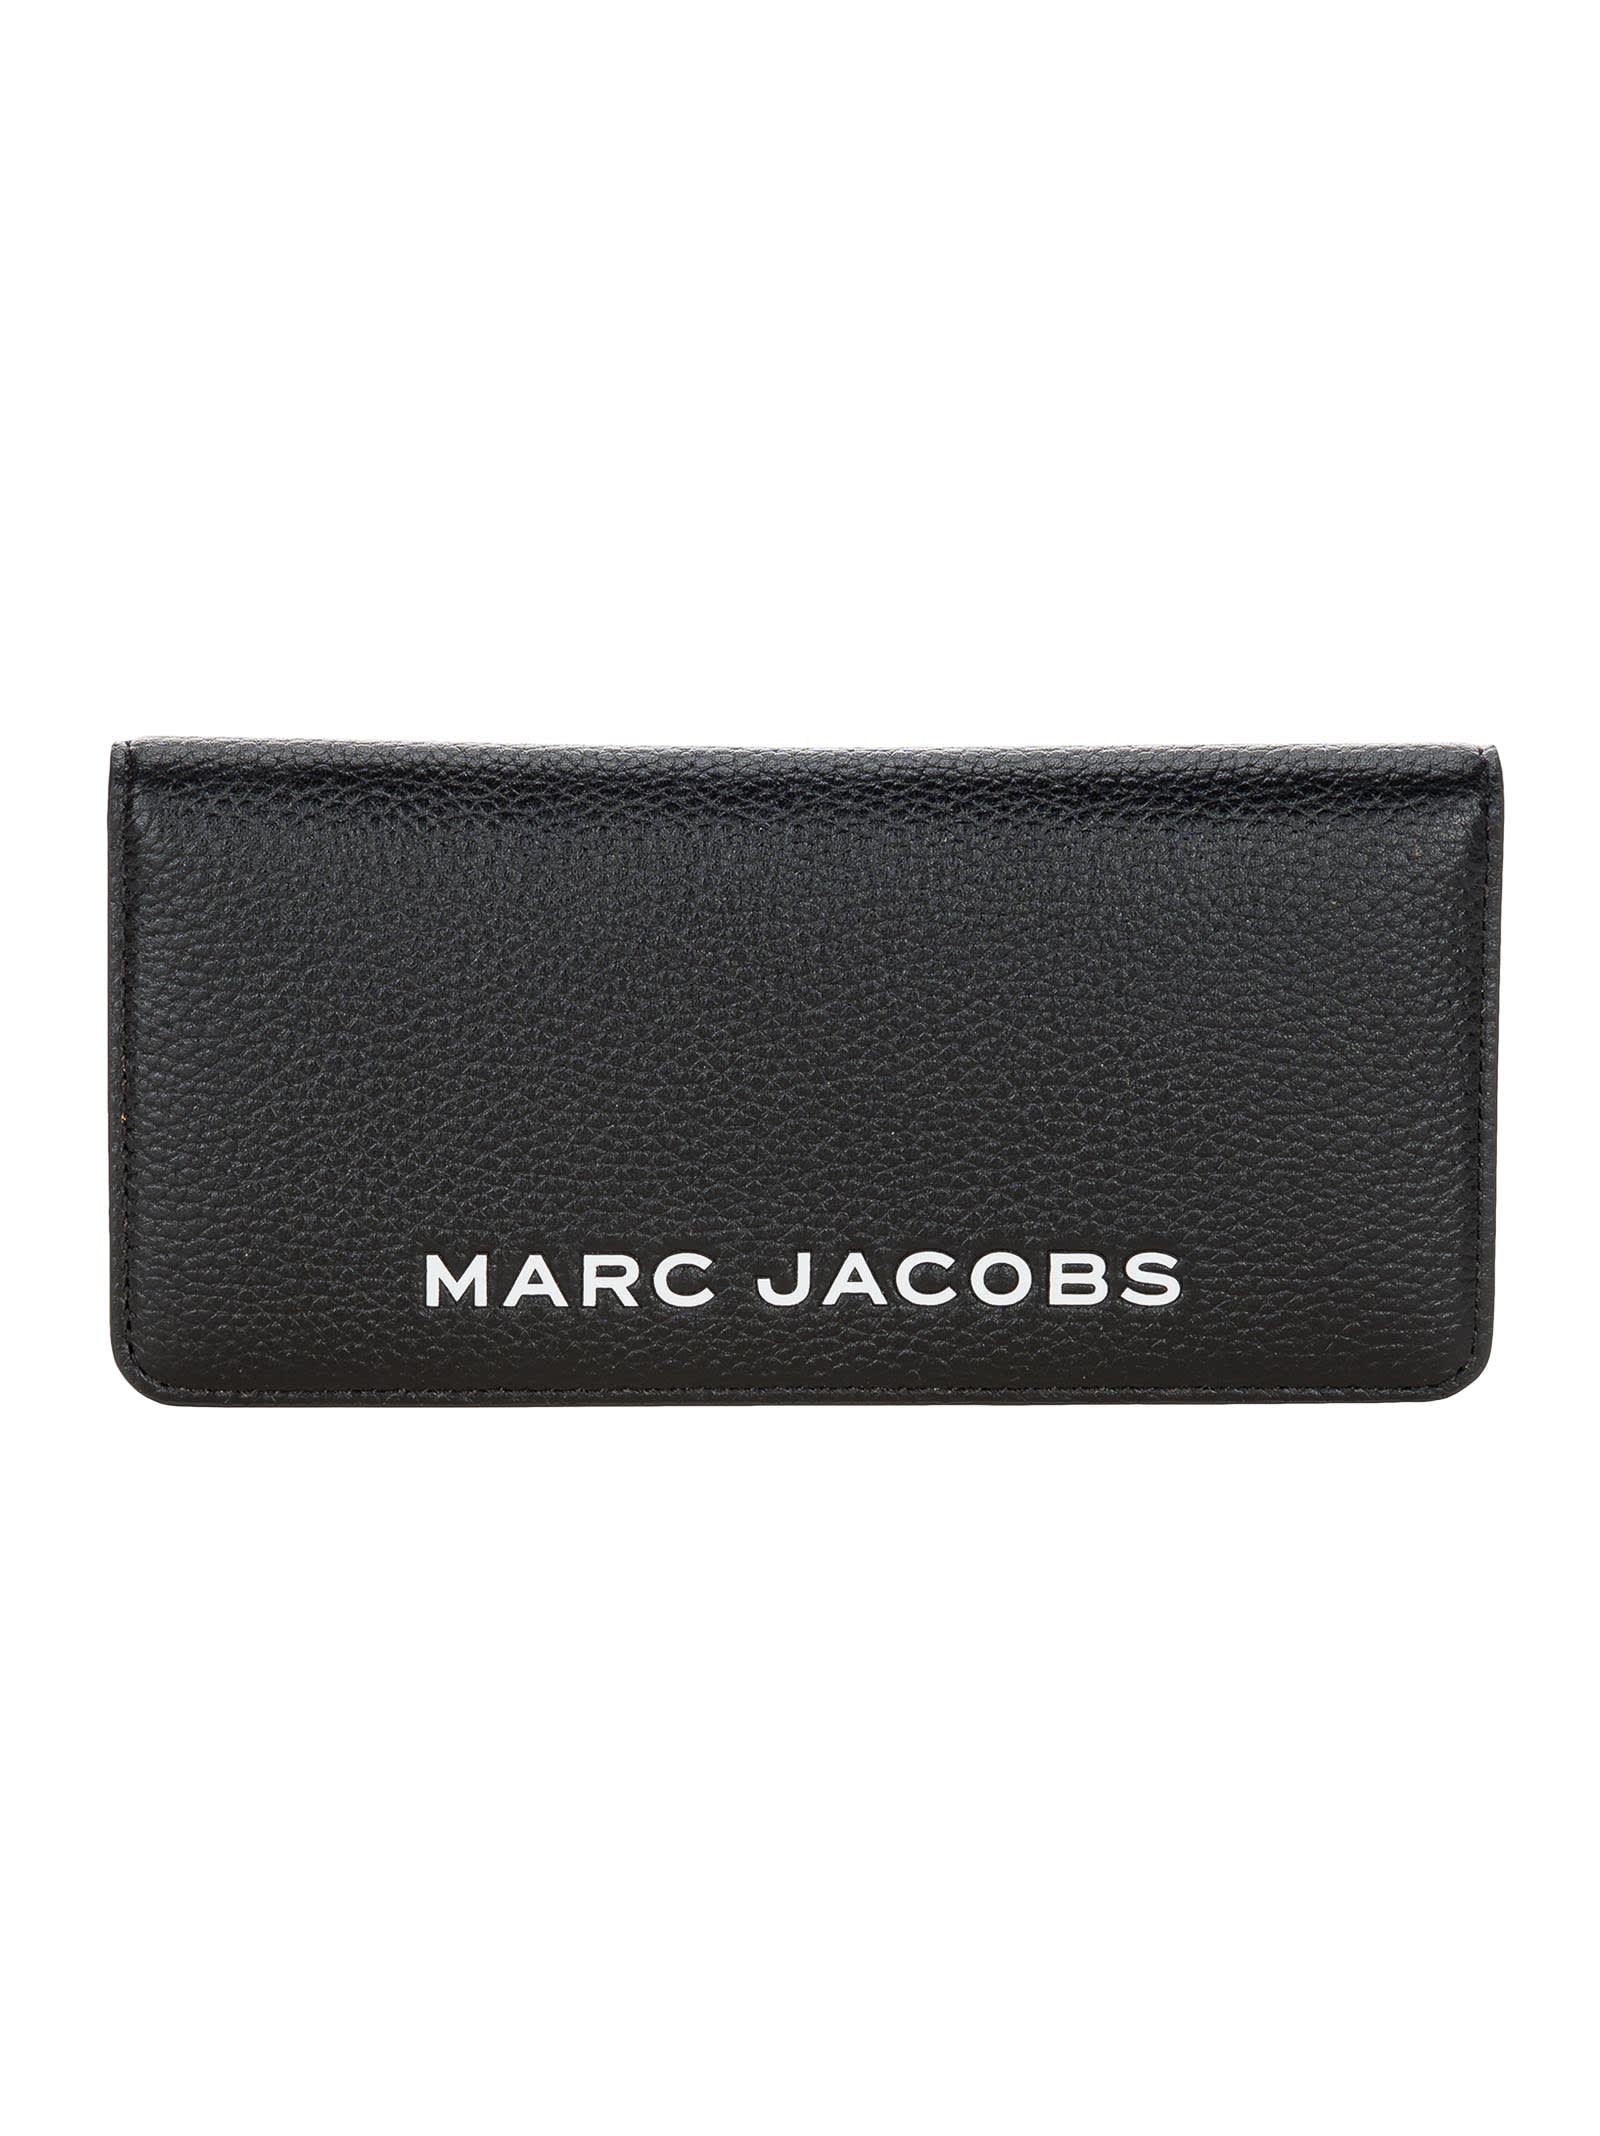 Marc Jacobs The Bold Open Face Wallet